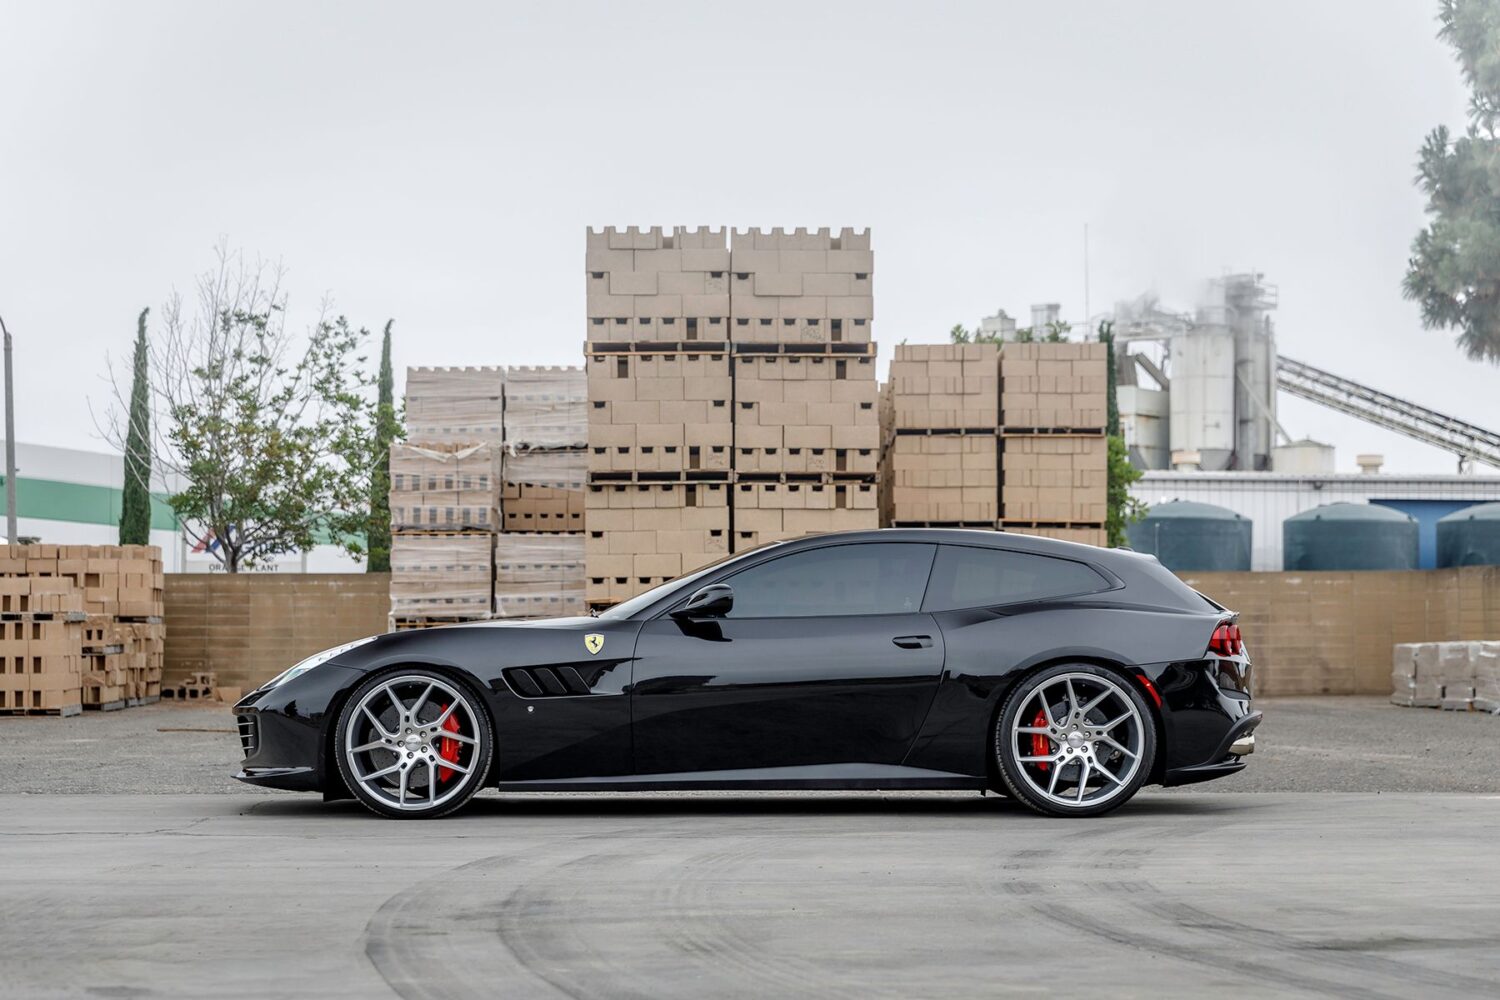 Ferrari GTC4 Lusso with 22×9 and 22×10.5-inch Giovanna Gianelle Dilijan
